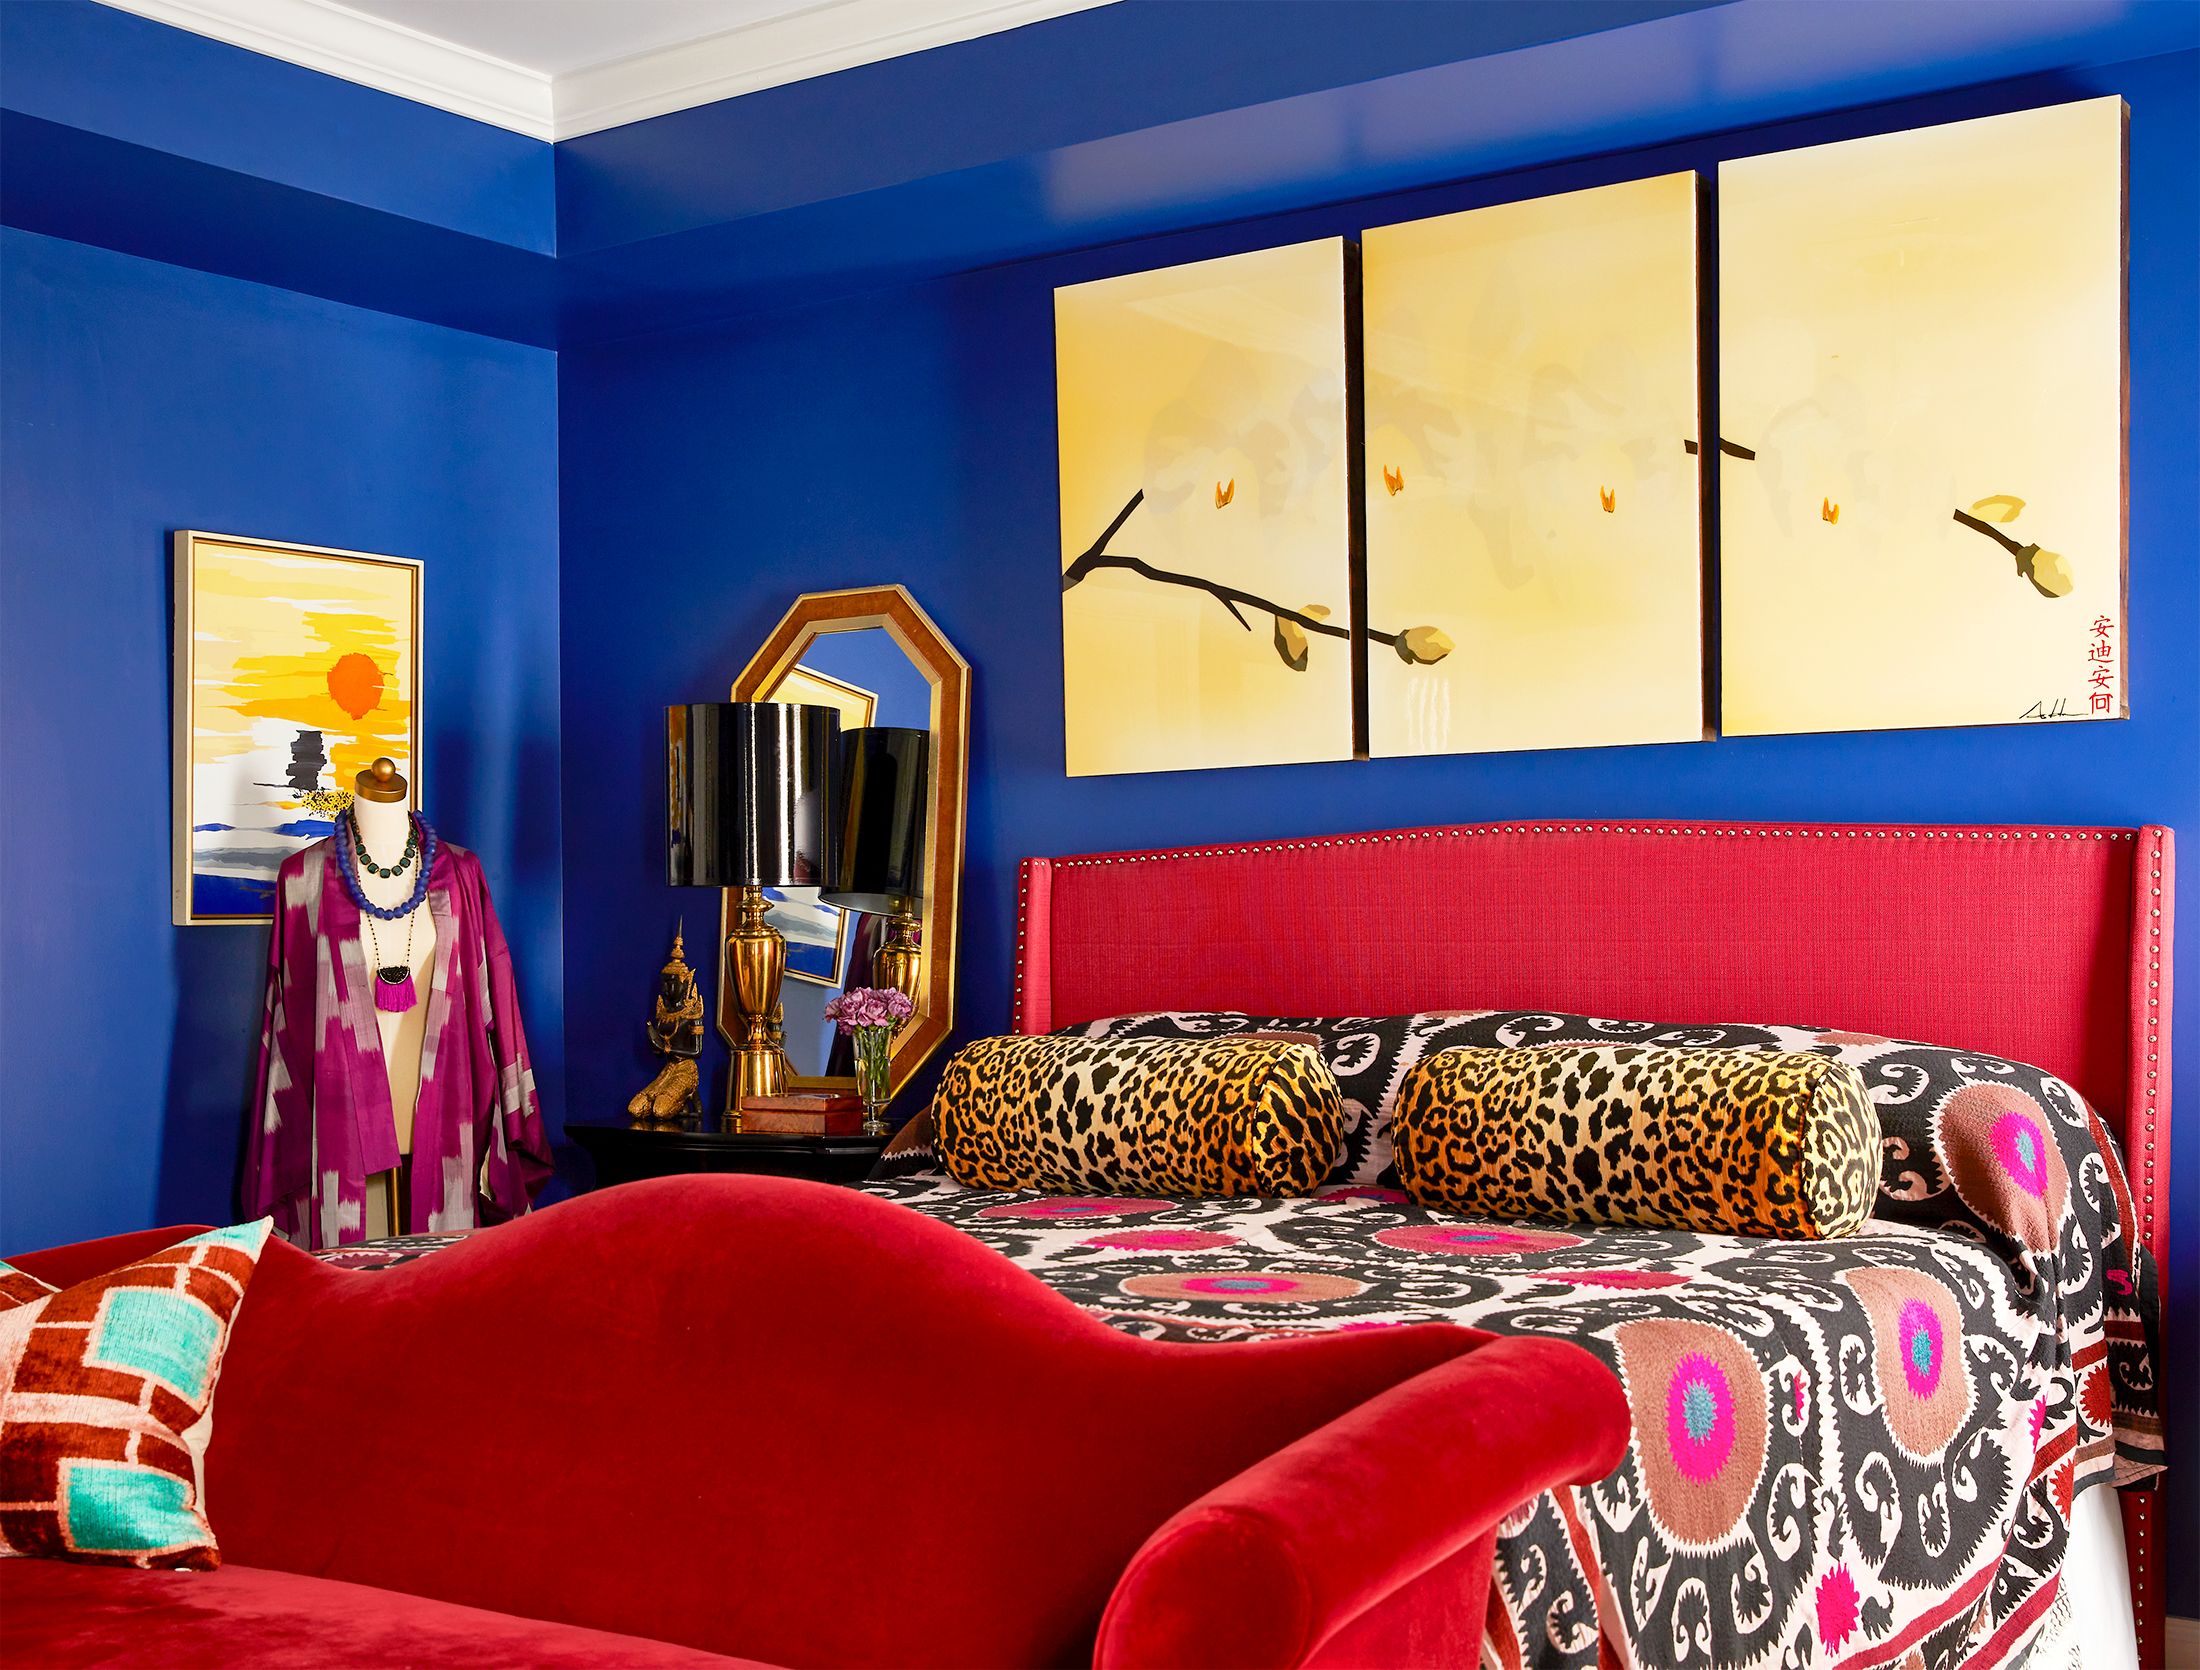 Red and Blue Room Design Ideas - Red and Blue Decor